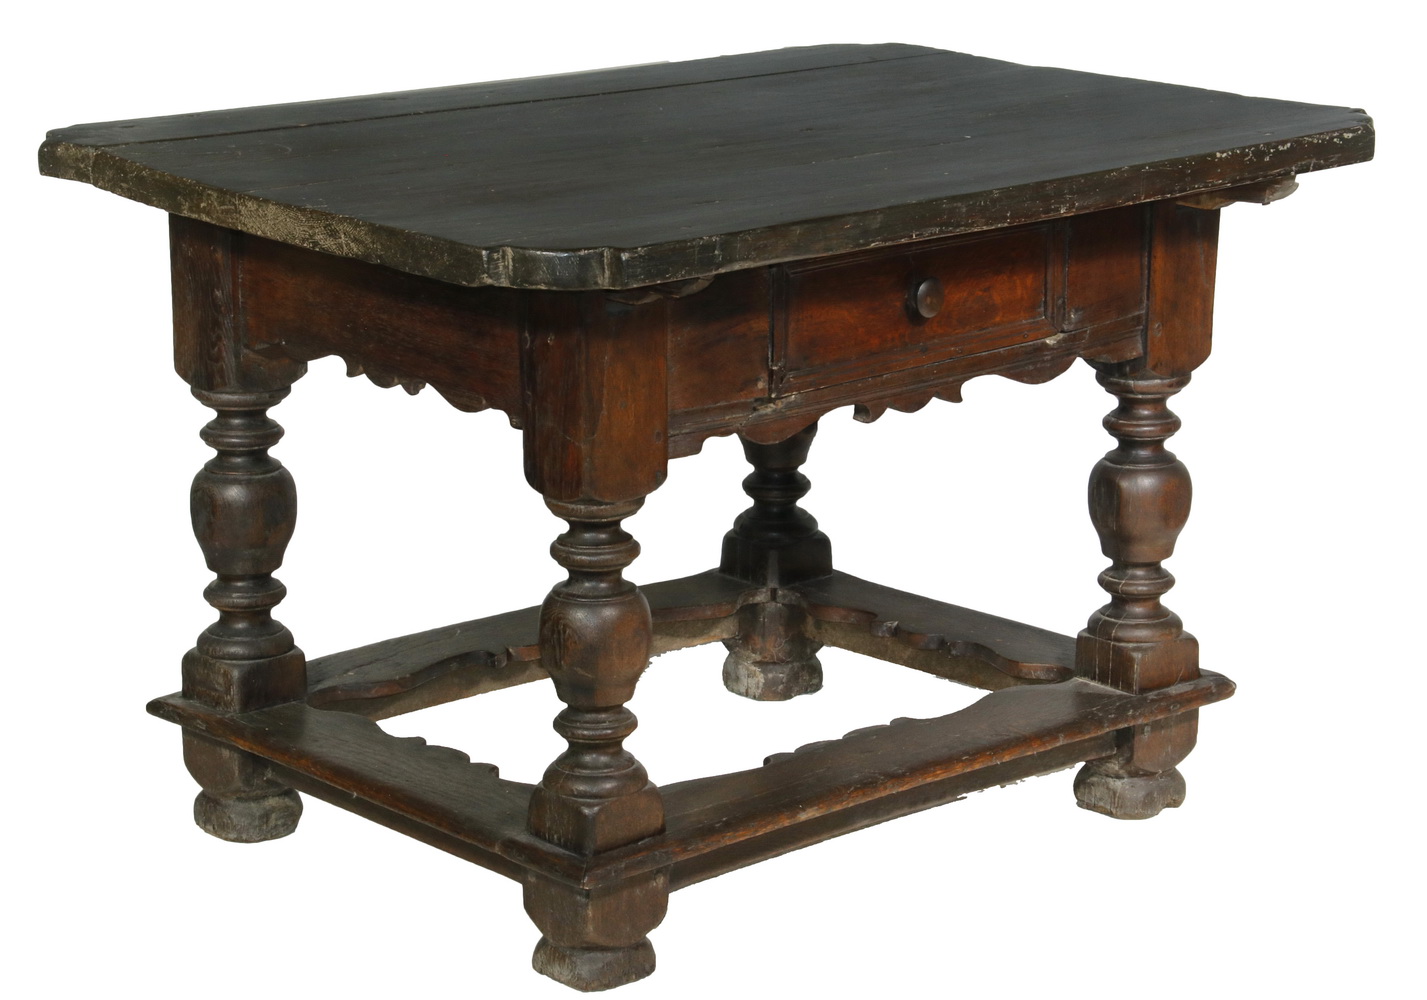 EARLY TAVERN TABLE 17th c. One-Drawer